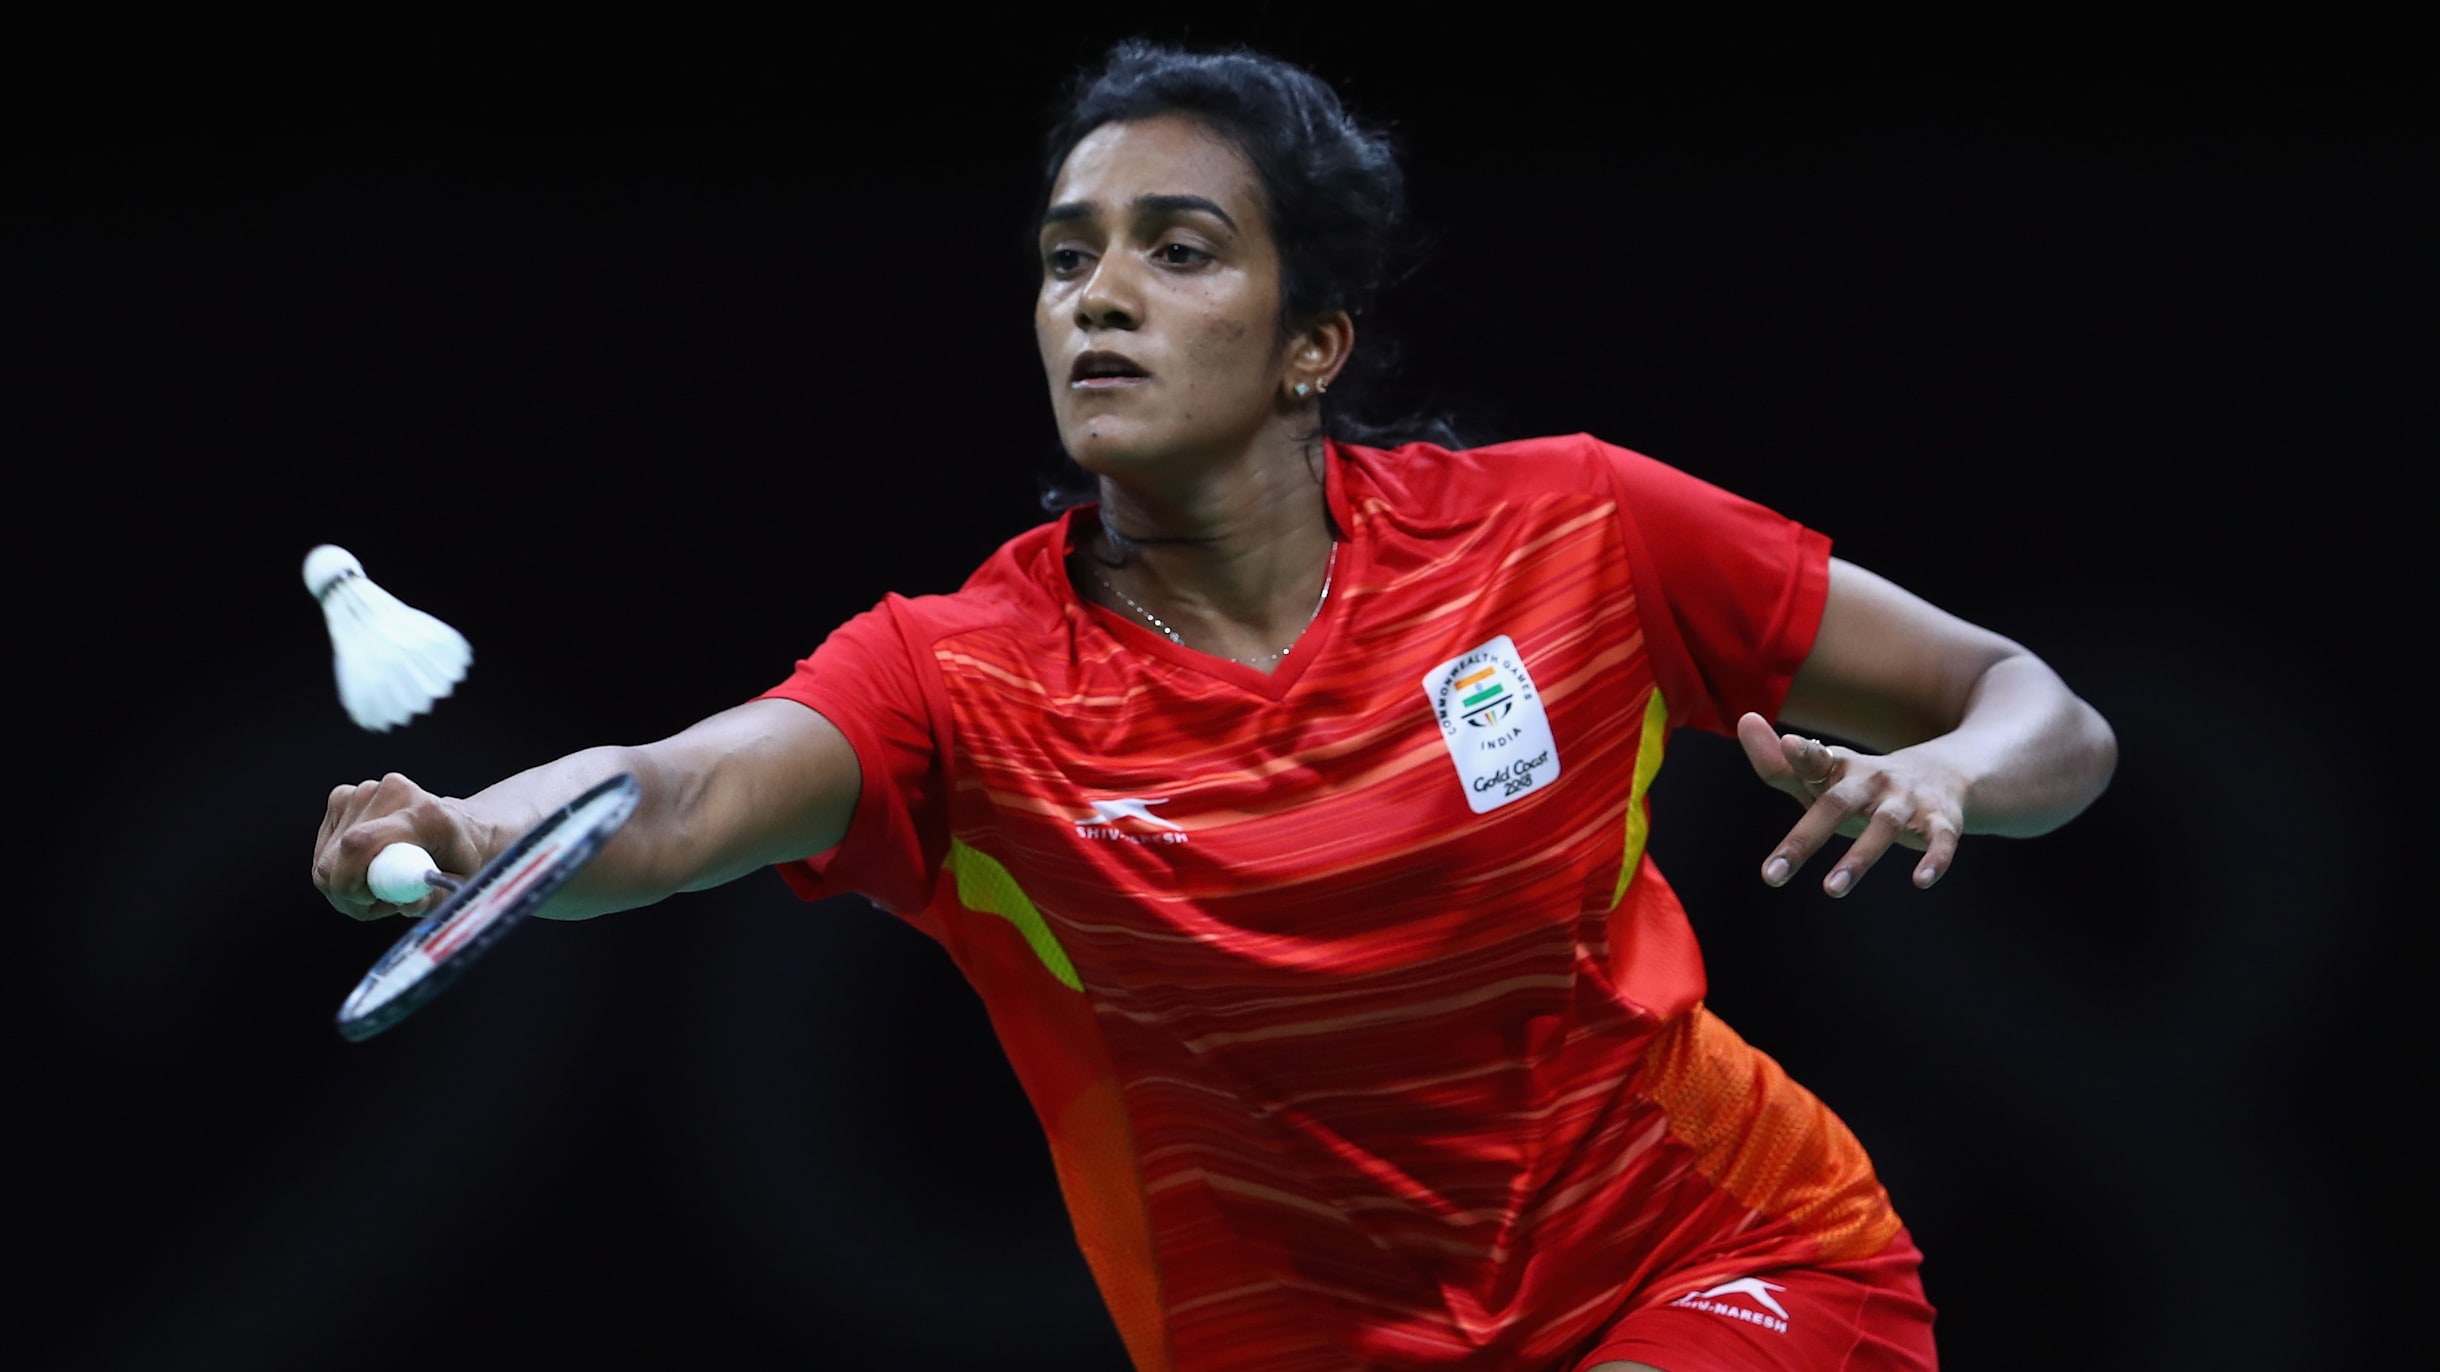 Commonwealth Games 2022 badminton Get schedule and watch live telecast and streaming in India